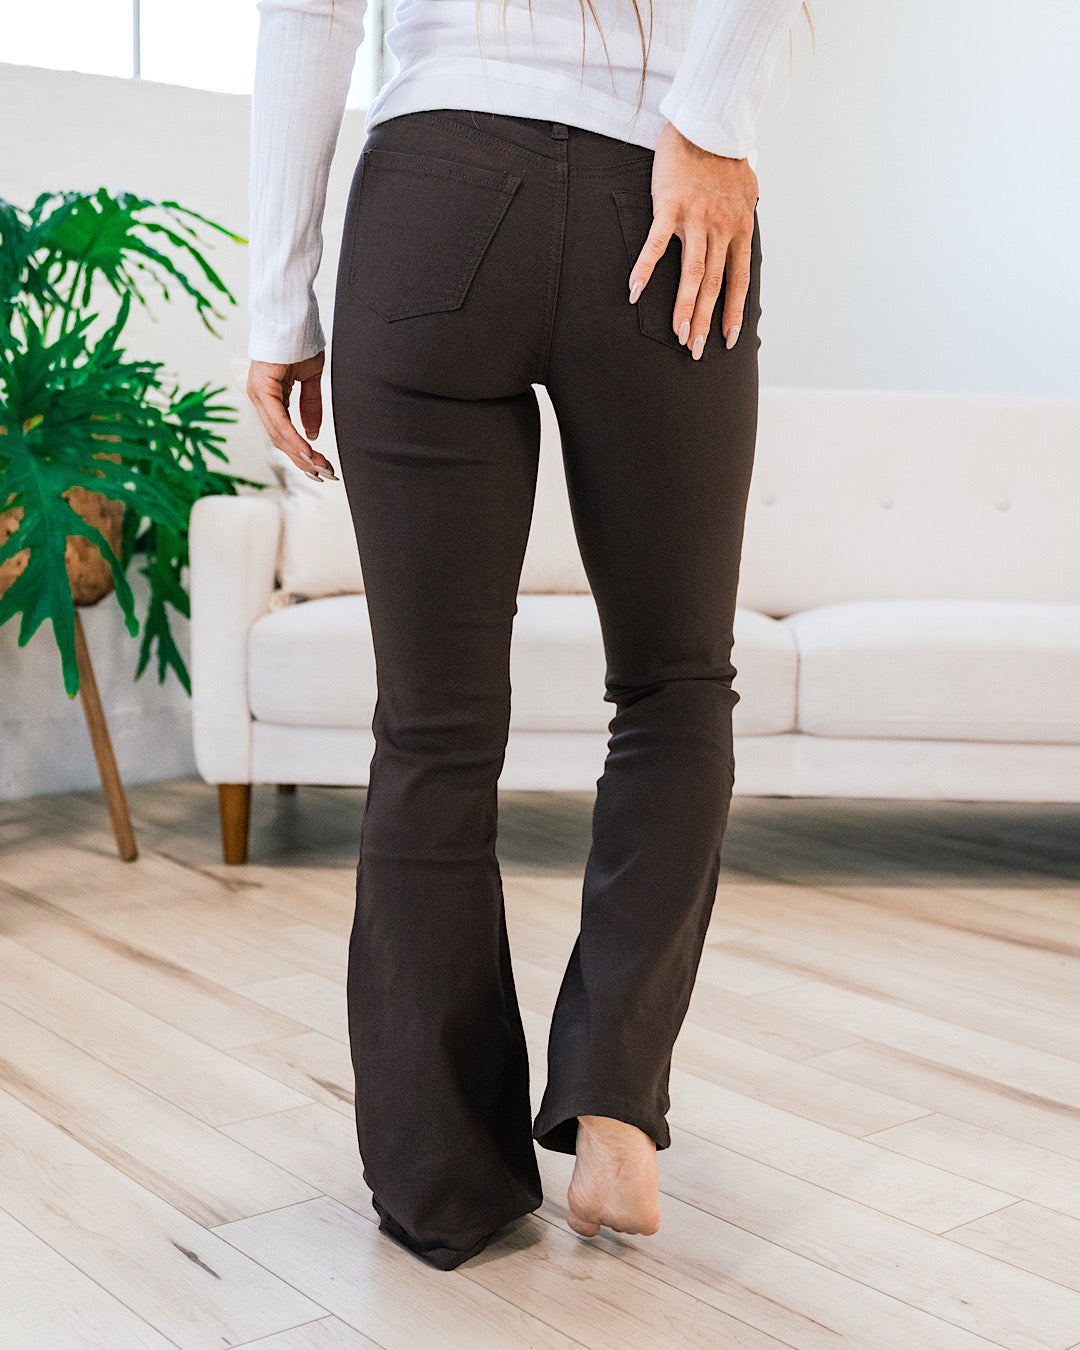 NEW! Hyperstretch Flare Jeans Regular and Plus - Cocoa  YMI   